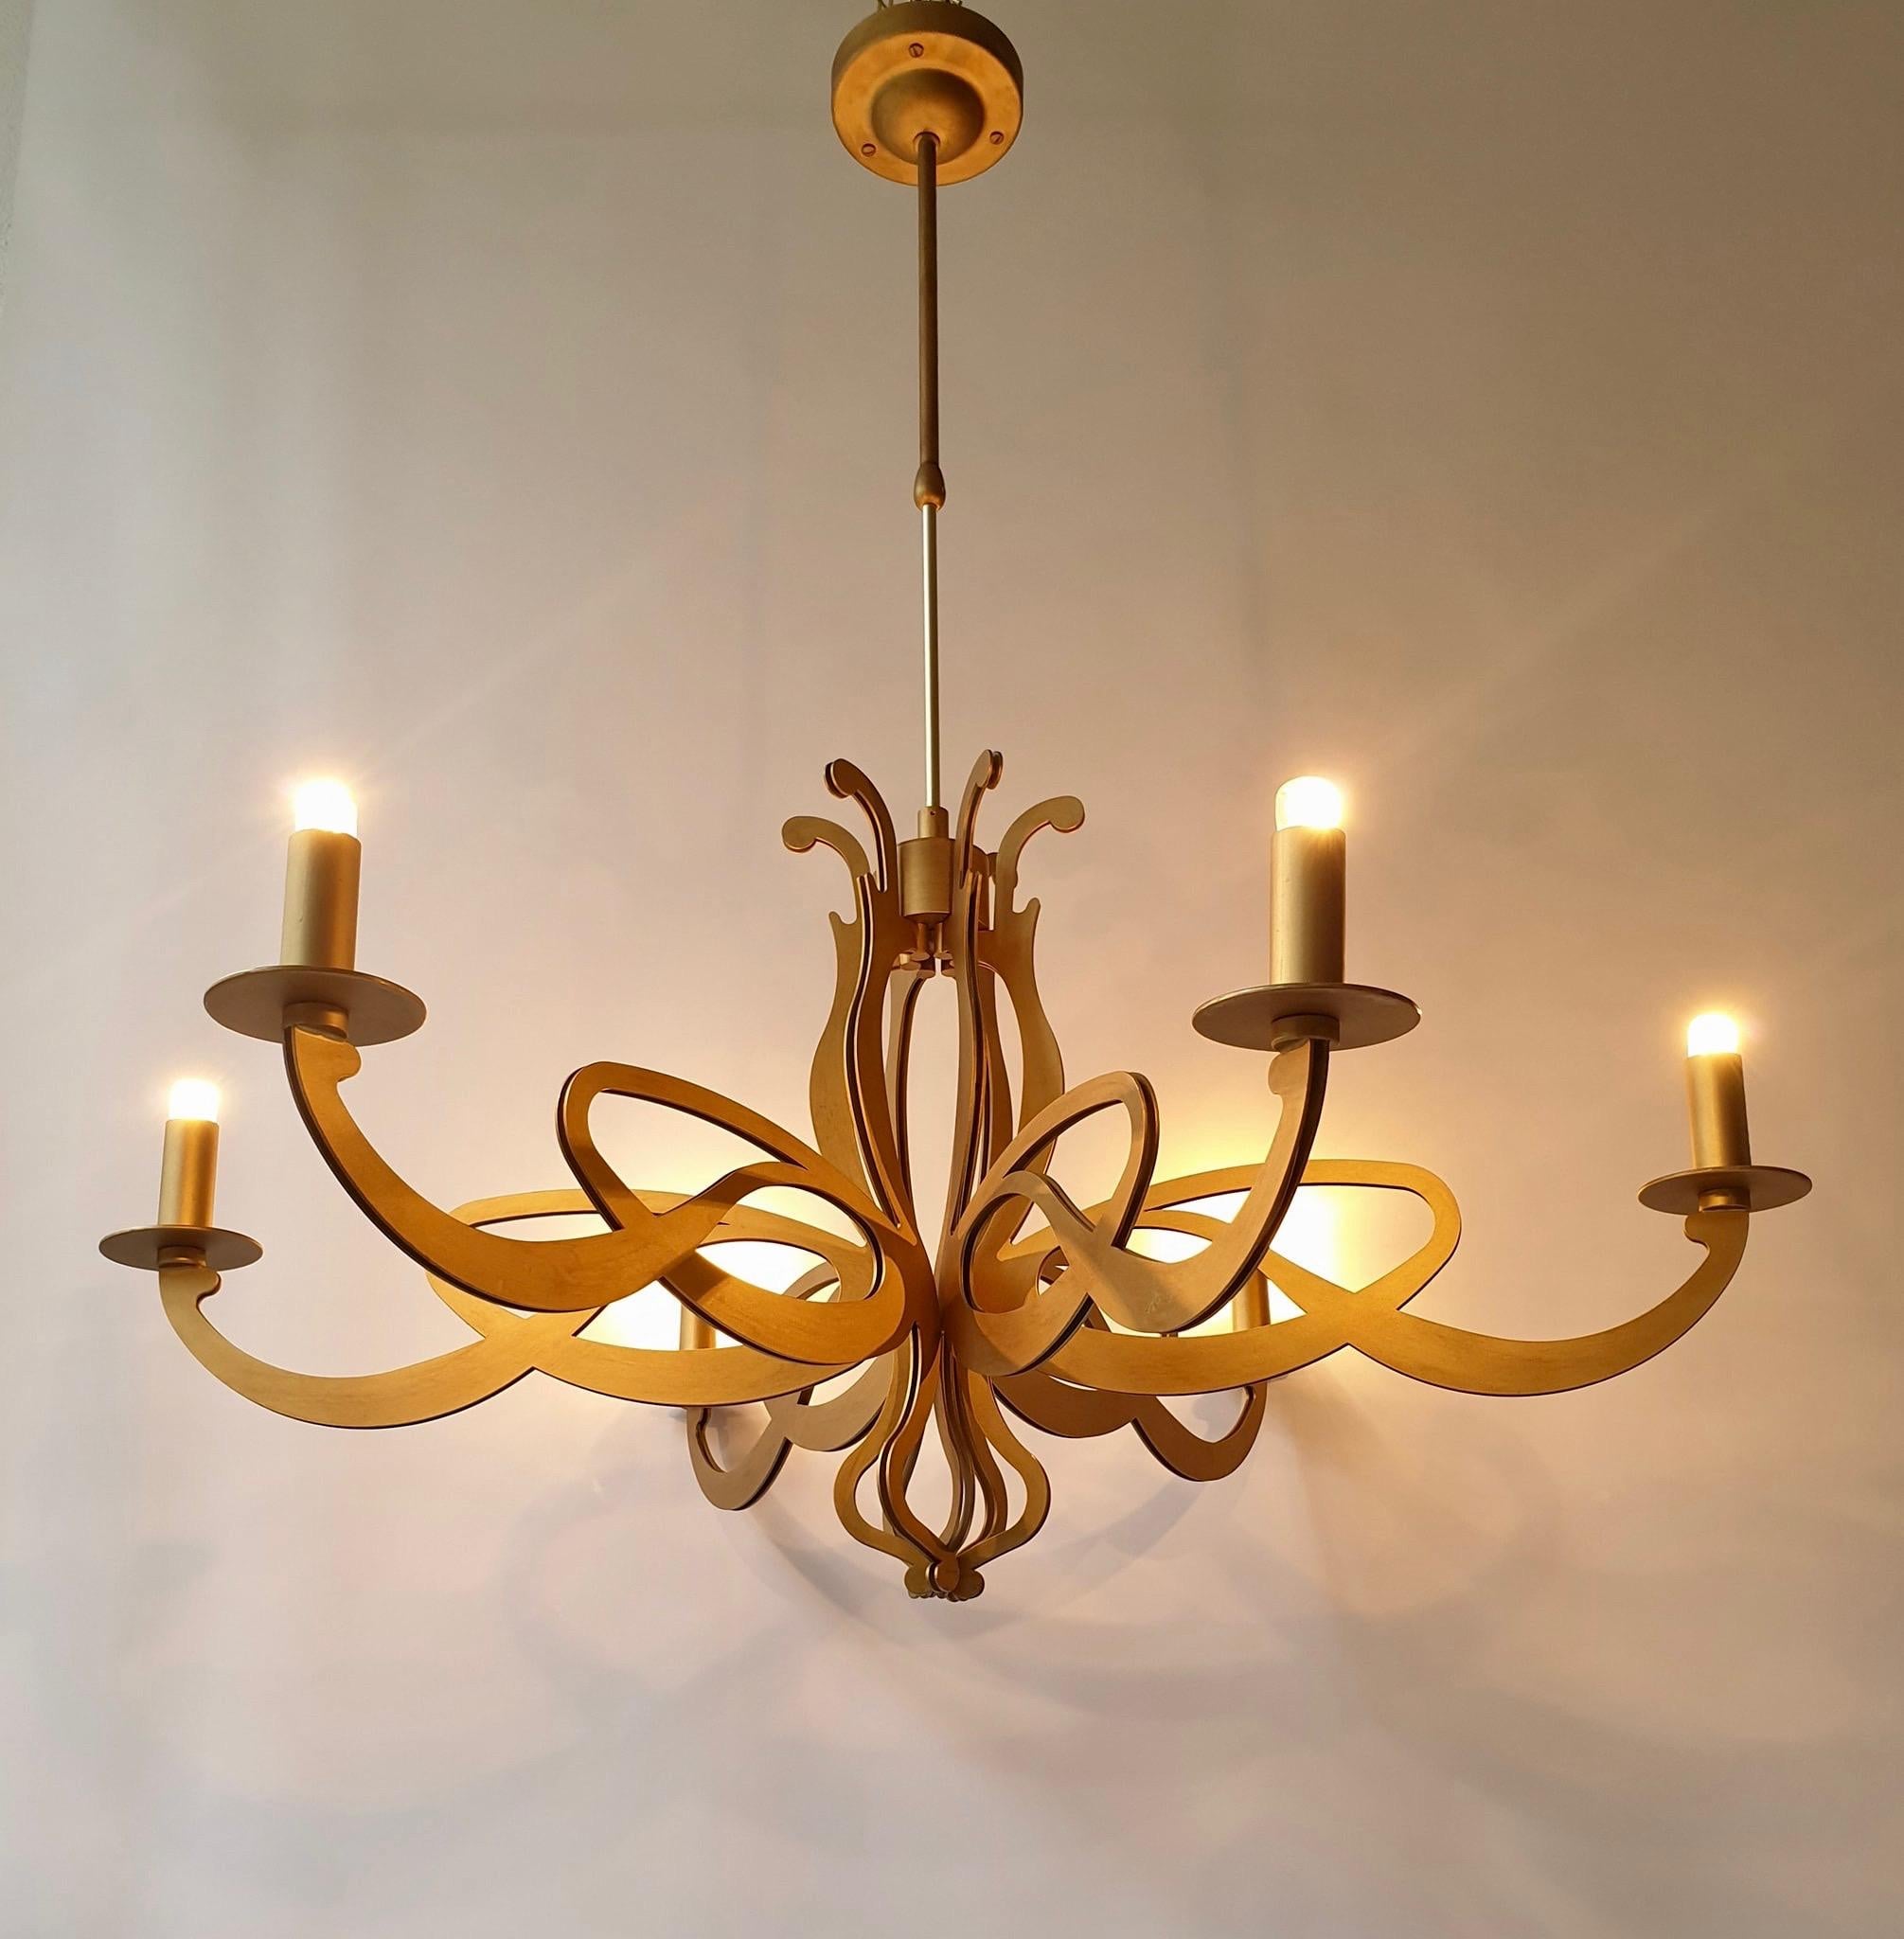 One large elegant Art Nouveau chandelier adjustable in height with an extendable telescope suspension system.

The chandelier has six sockets for small incandescent lamps with screw base or E14 type LEDs. It is possible to install this fixture in